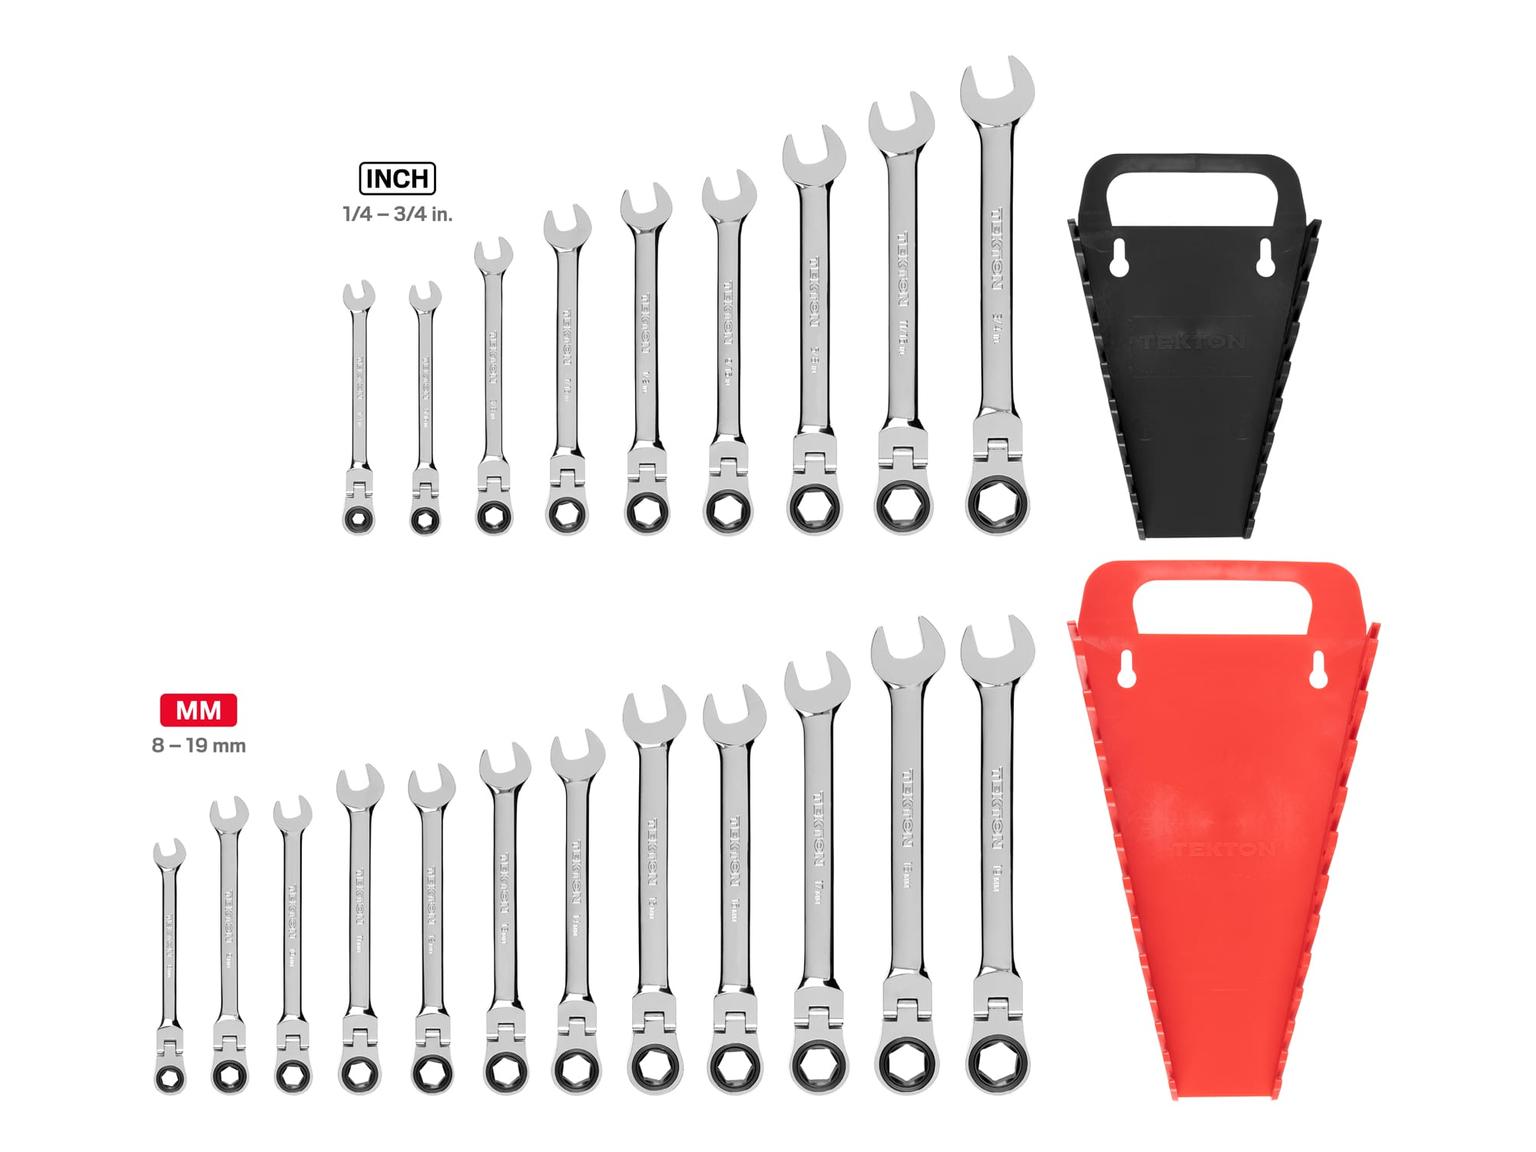 TEKTON WRN57321-T Flex Ratcheting Combination Wrench Set with Holder, 21-Piece (1/4-3/4 in., 8-19 mm)